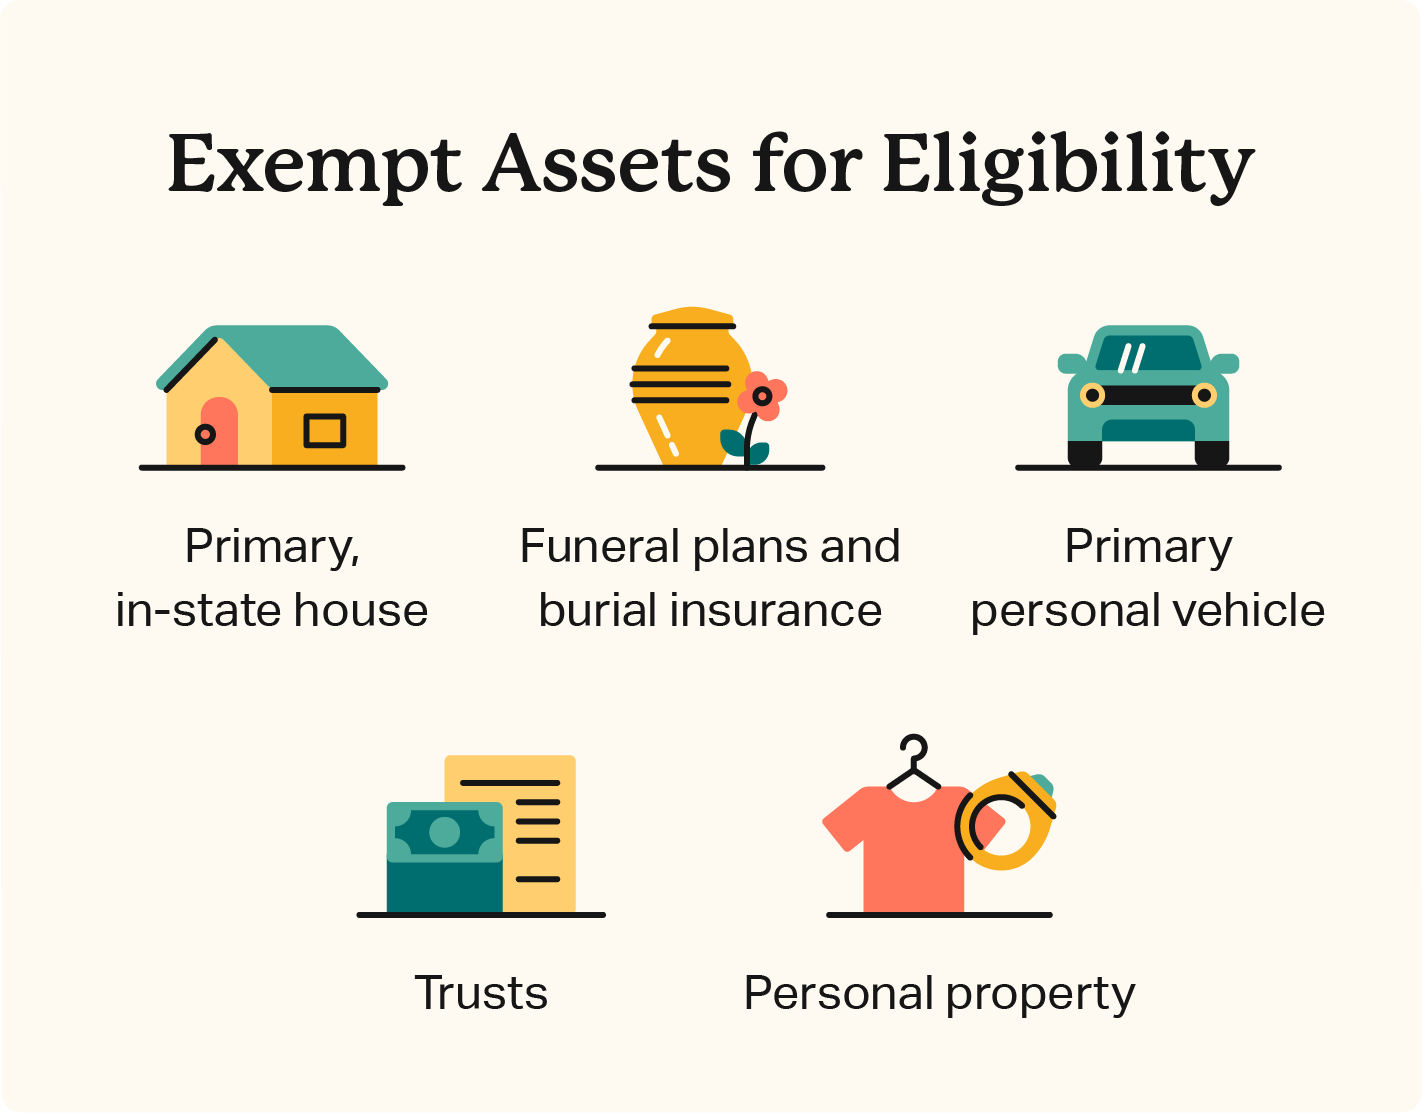 Illustrated icons represent 5 exempt assets, including your home, funeral plans and insurance, vehicle, trusts, and personal property.